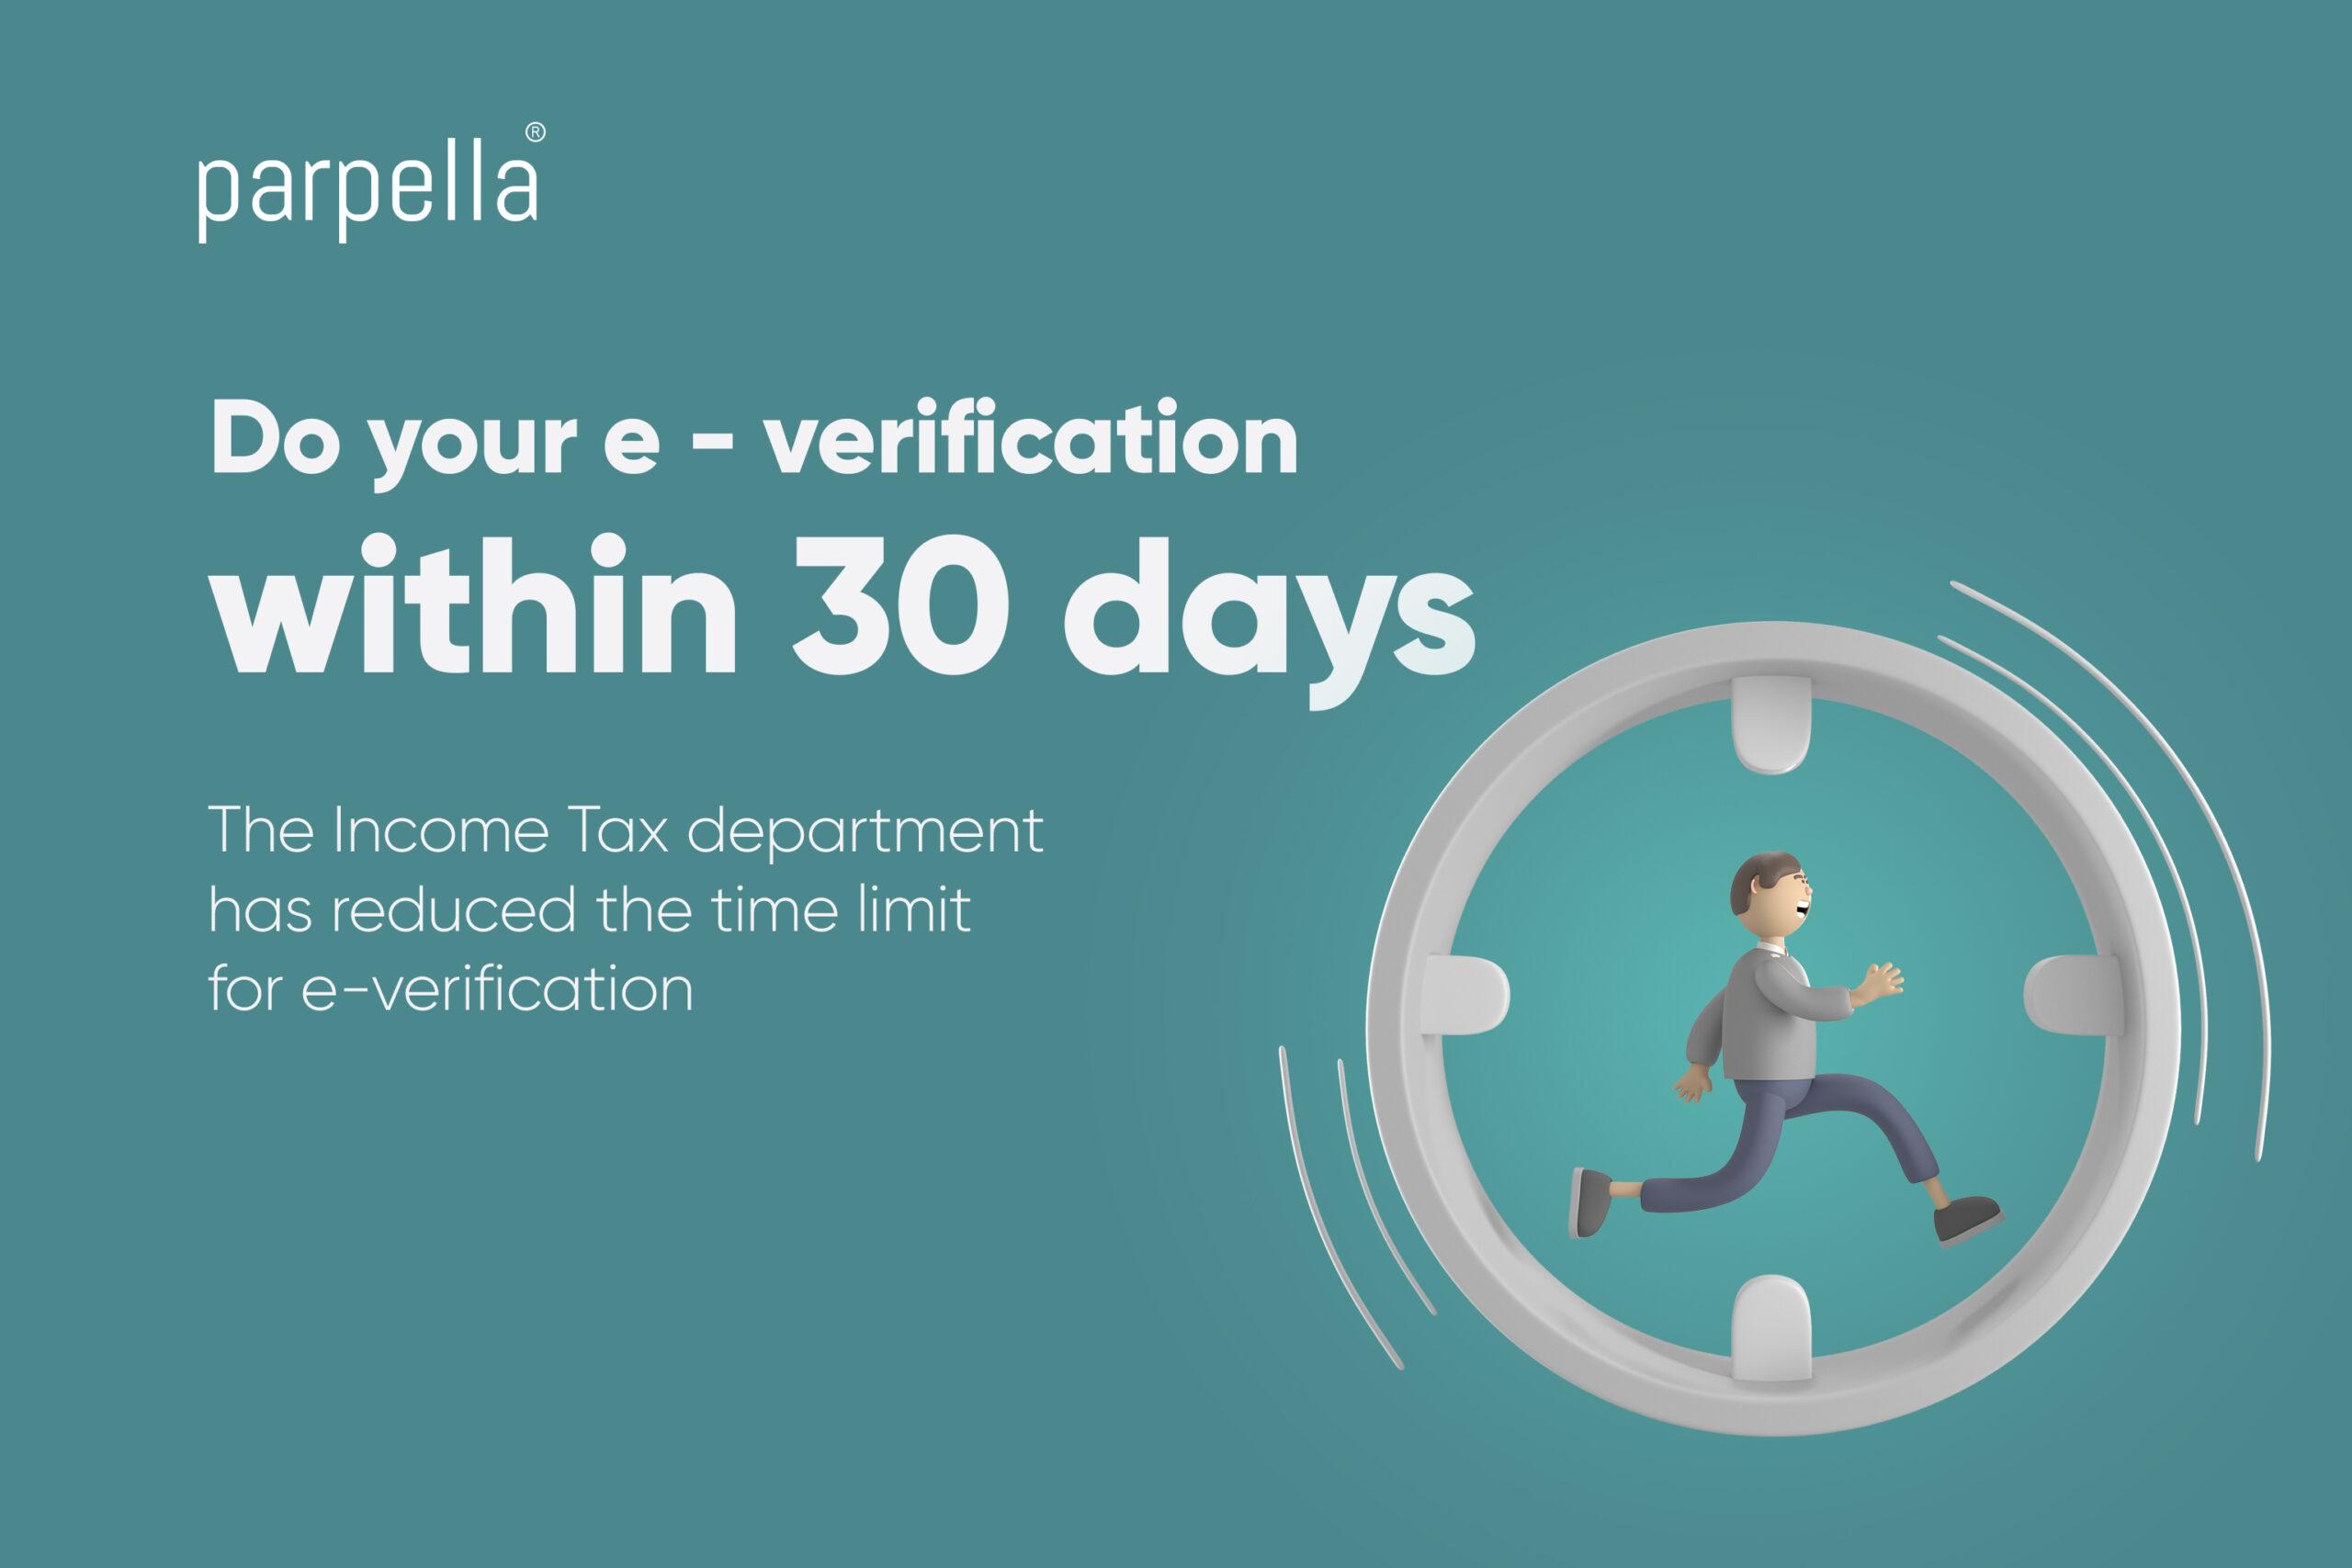 The time limit for E-verification of income tax returns (ITR) has been reduced